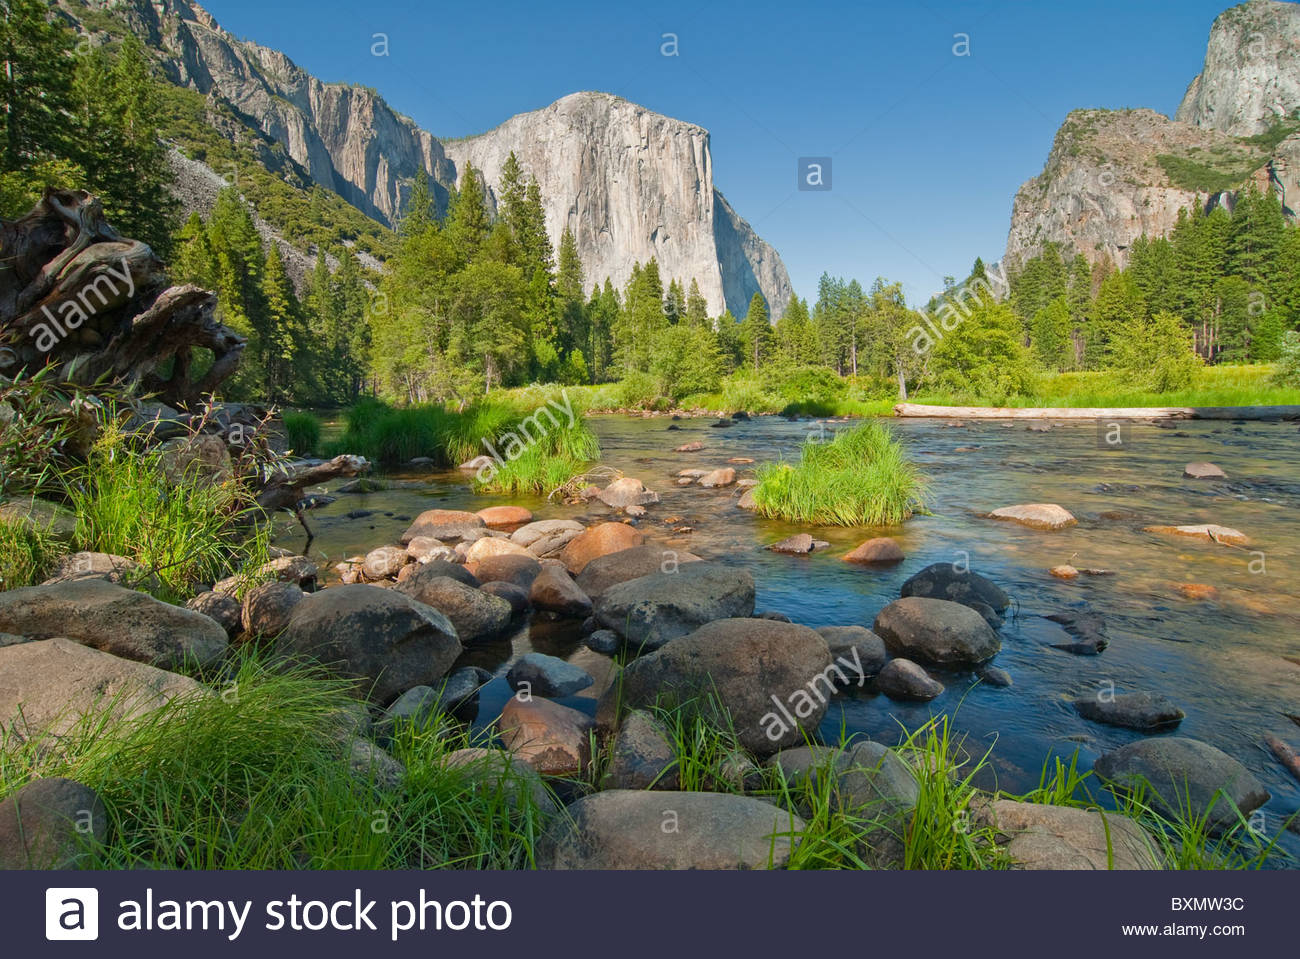 Merced River And The Massive El Capitan In Background